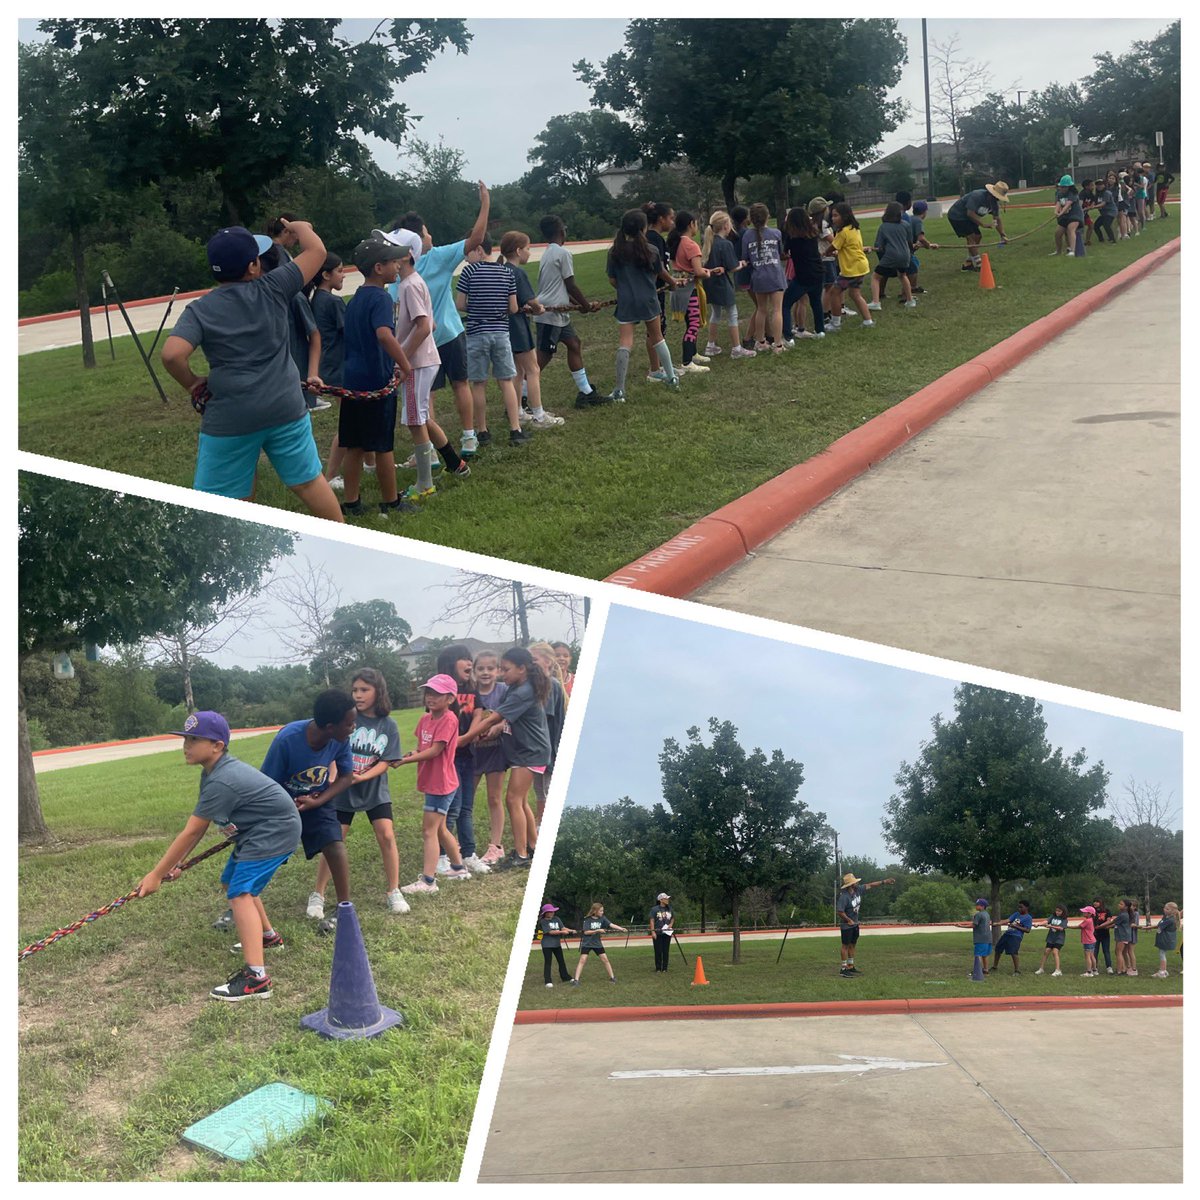 🏆 🎵 WE ARE THE CHAMPIONS … of TUG O WAR!!🎵 🏆 These kiddos won the entire competition against all 3rd grade classes AND the third grade teachers! It was an amazing start to our morning! @NISDCole #thecoleway #thirdgrade #lovemybabies #fieldday